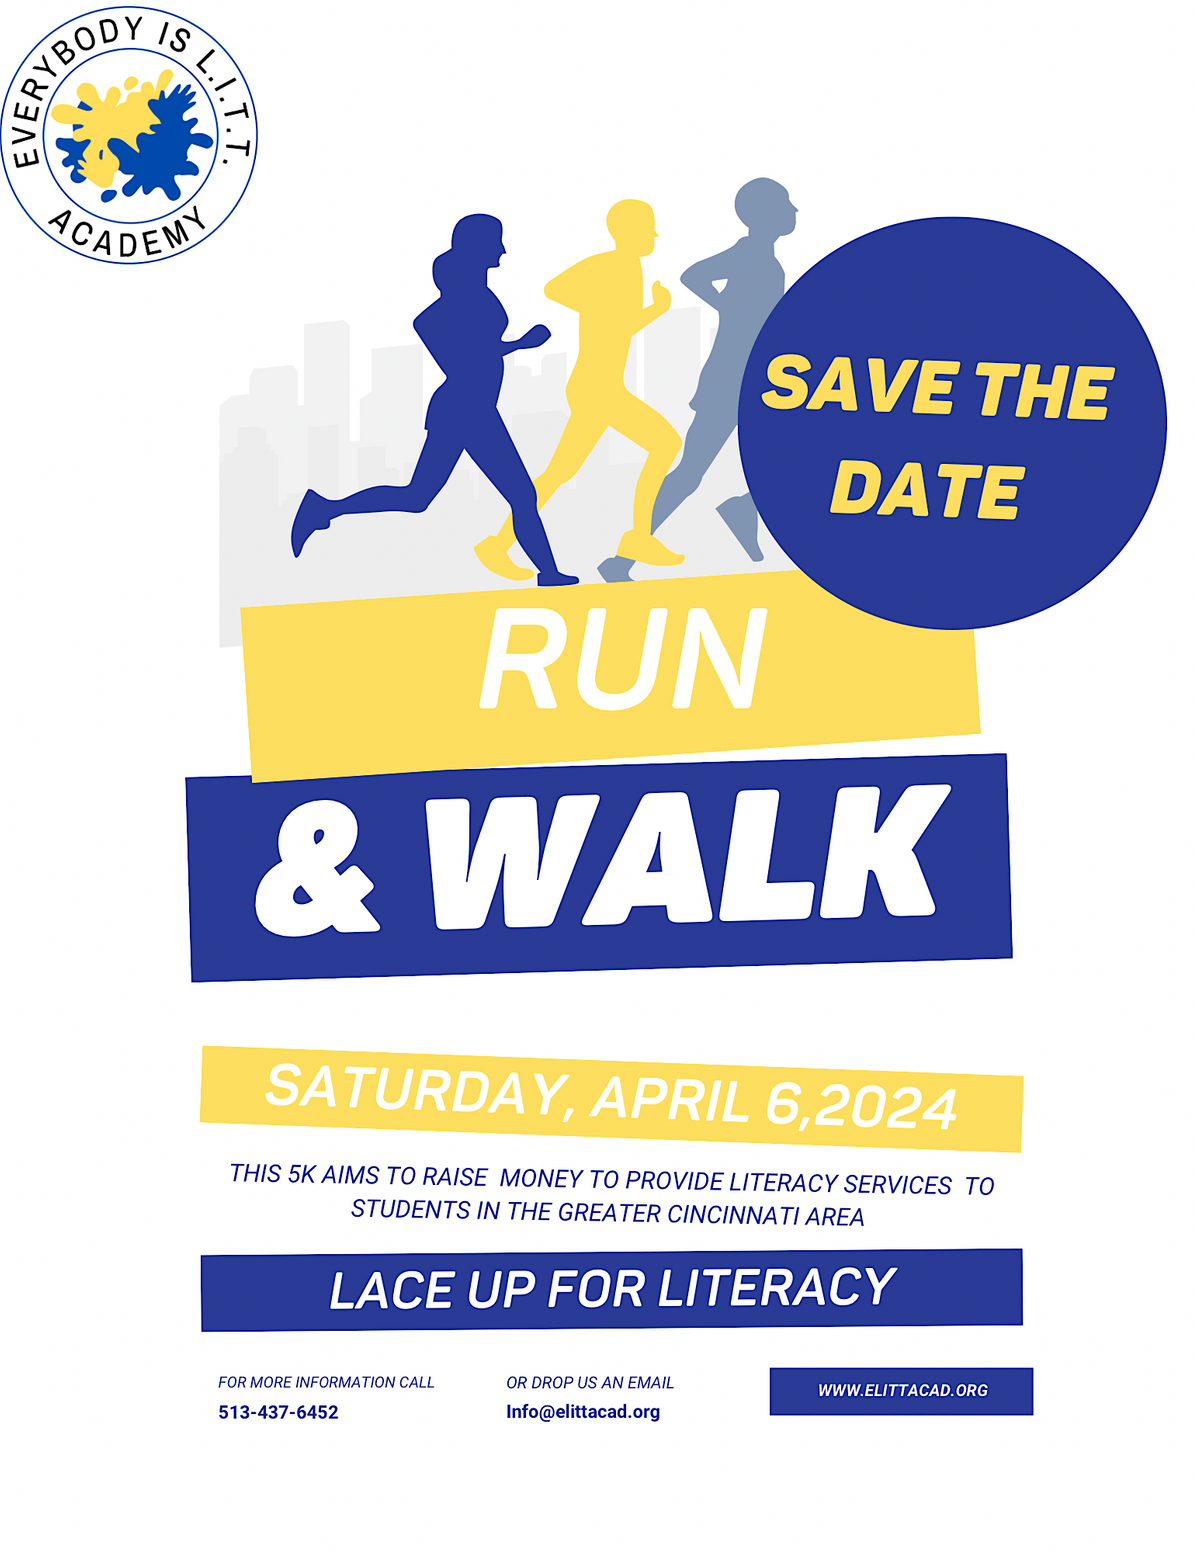 Lace up For Literacy 5k Walk and Run